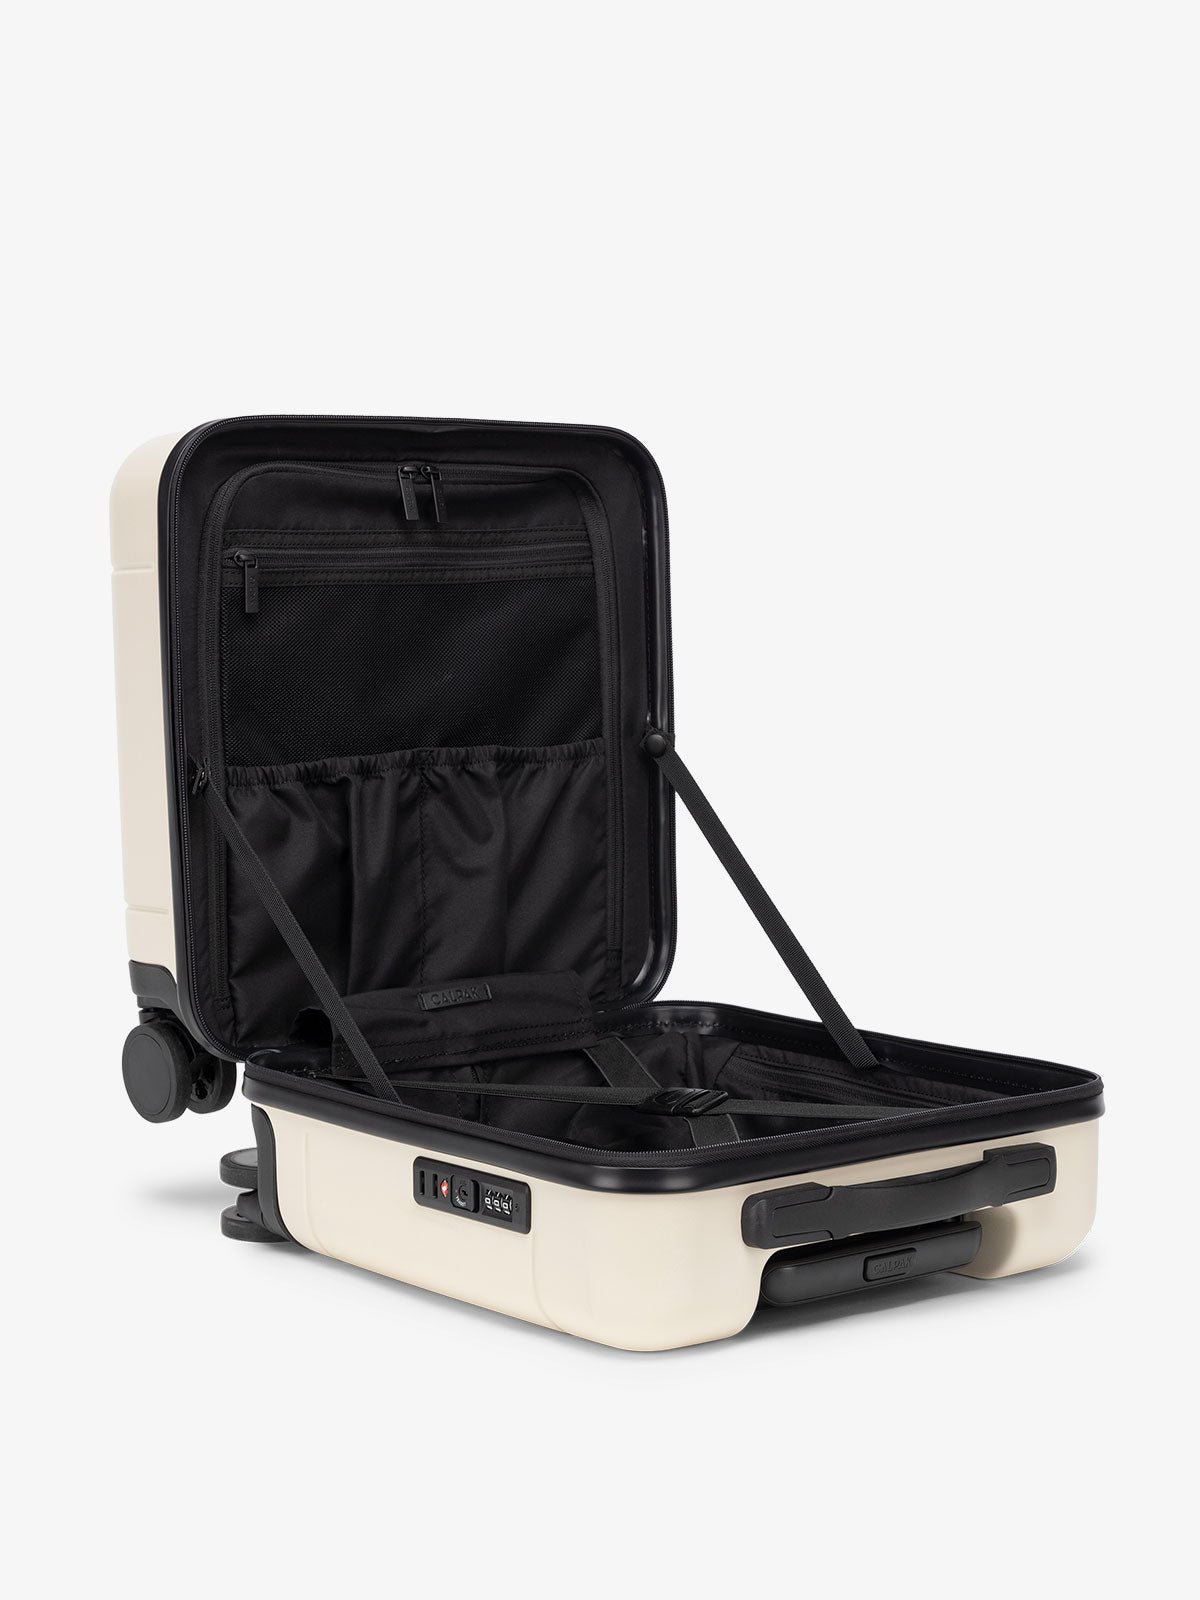 Hue small rolling travel bag with compression straps and multiple pockets